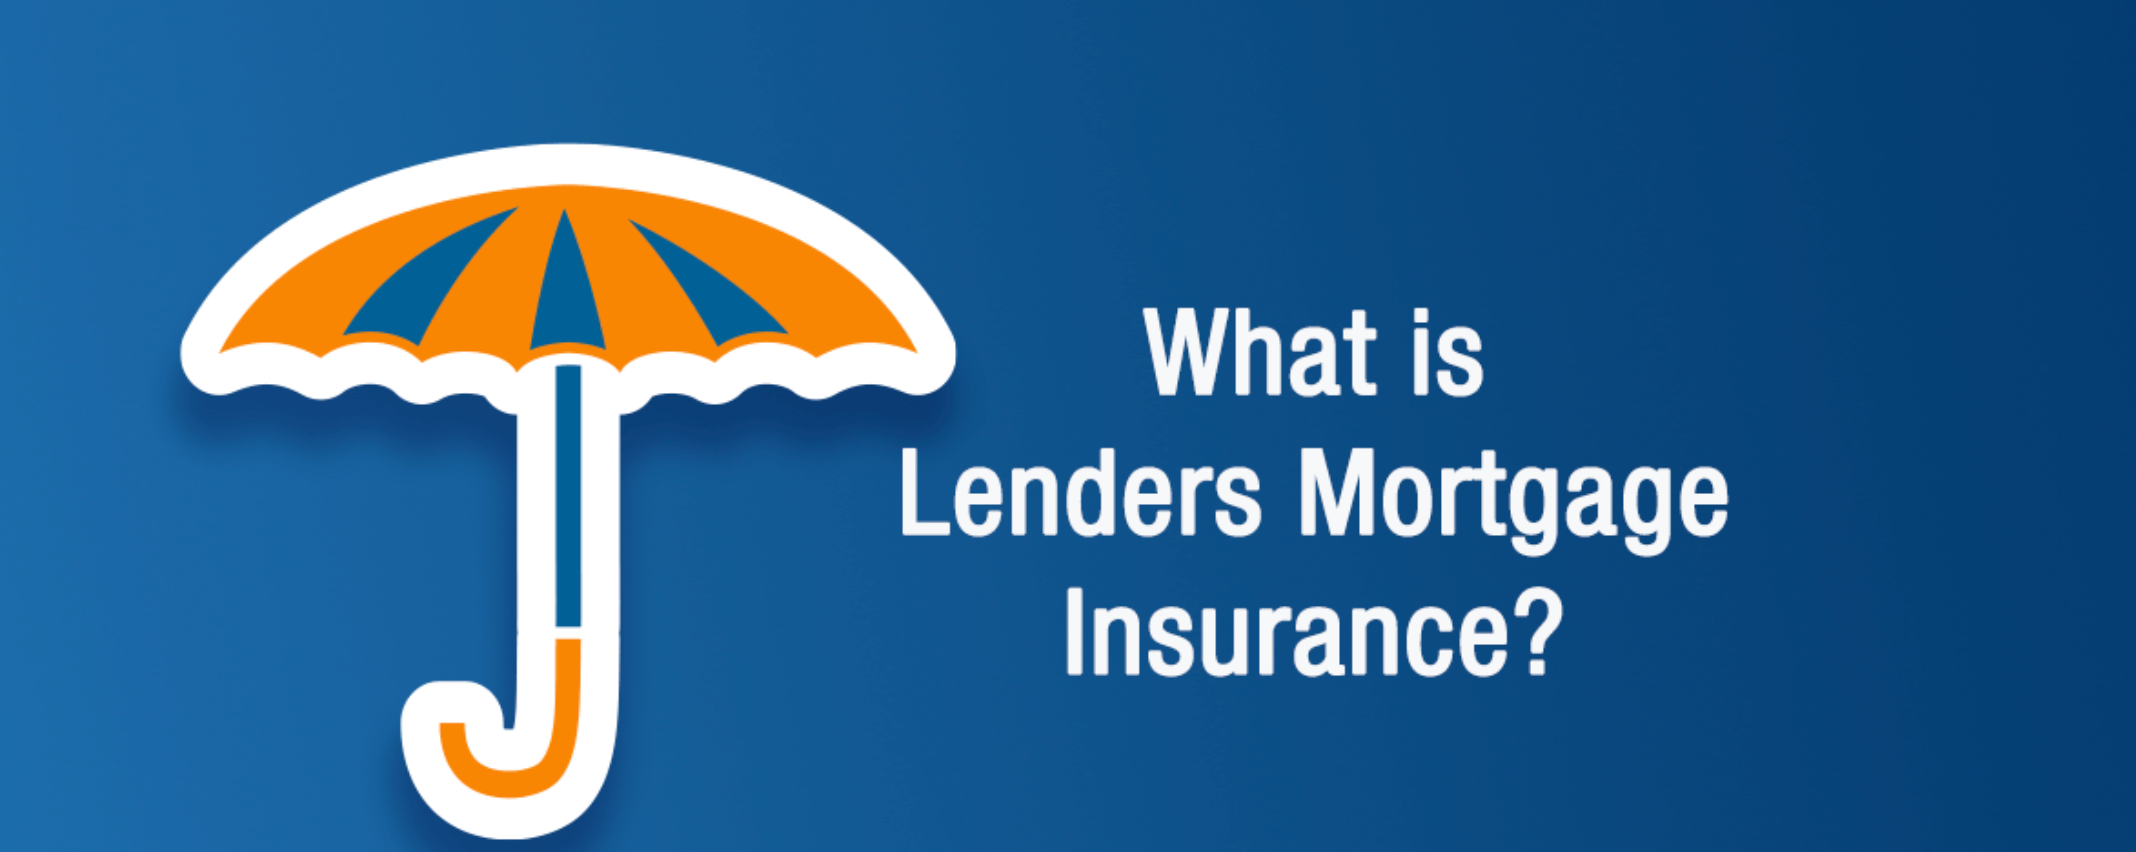 What is lenders mortgage insurance and how does it affect you if you don't have a 20% deposit